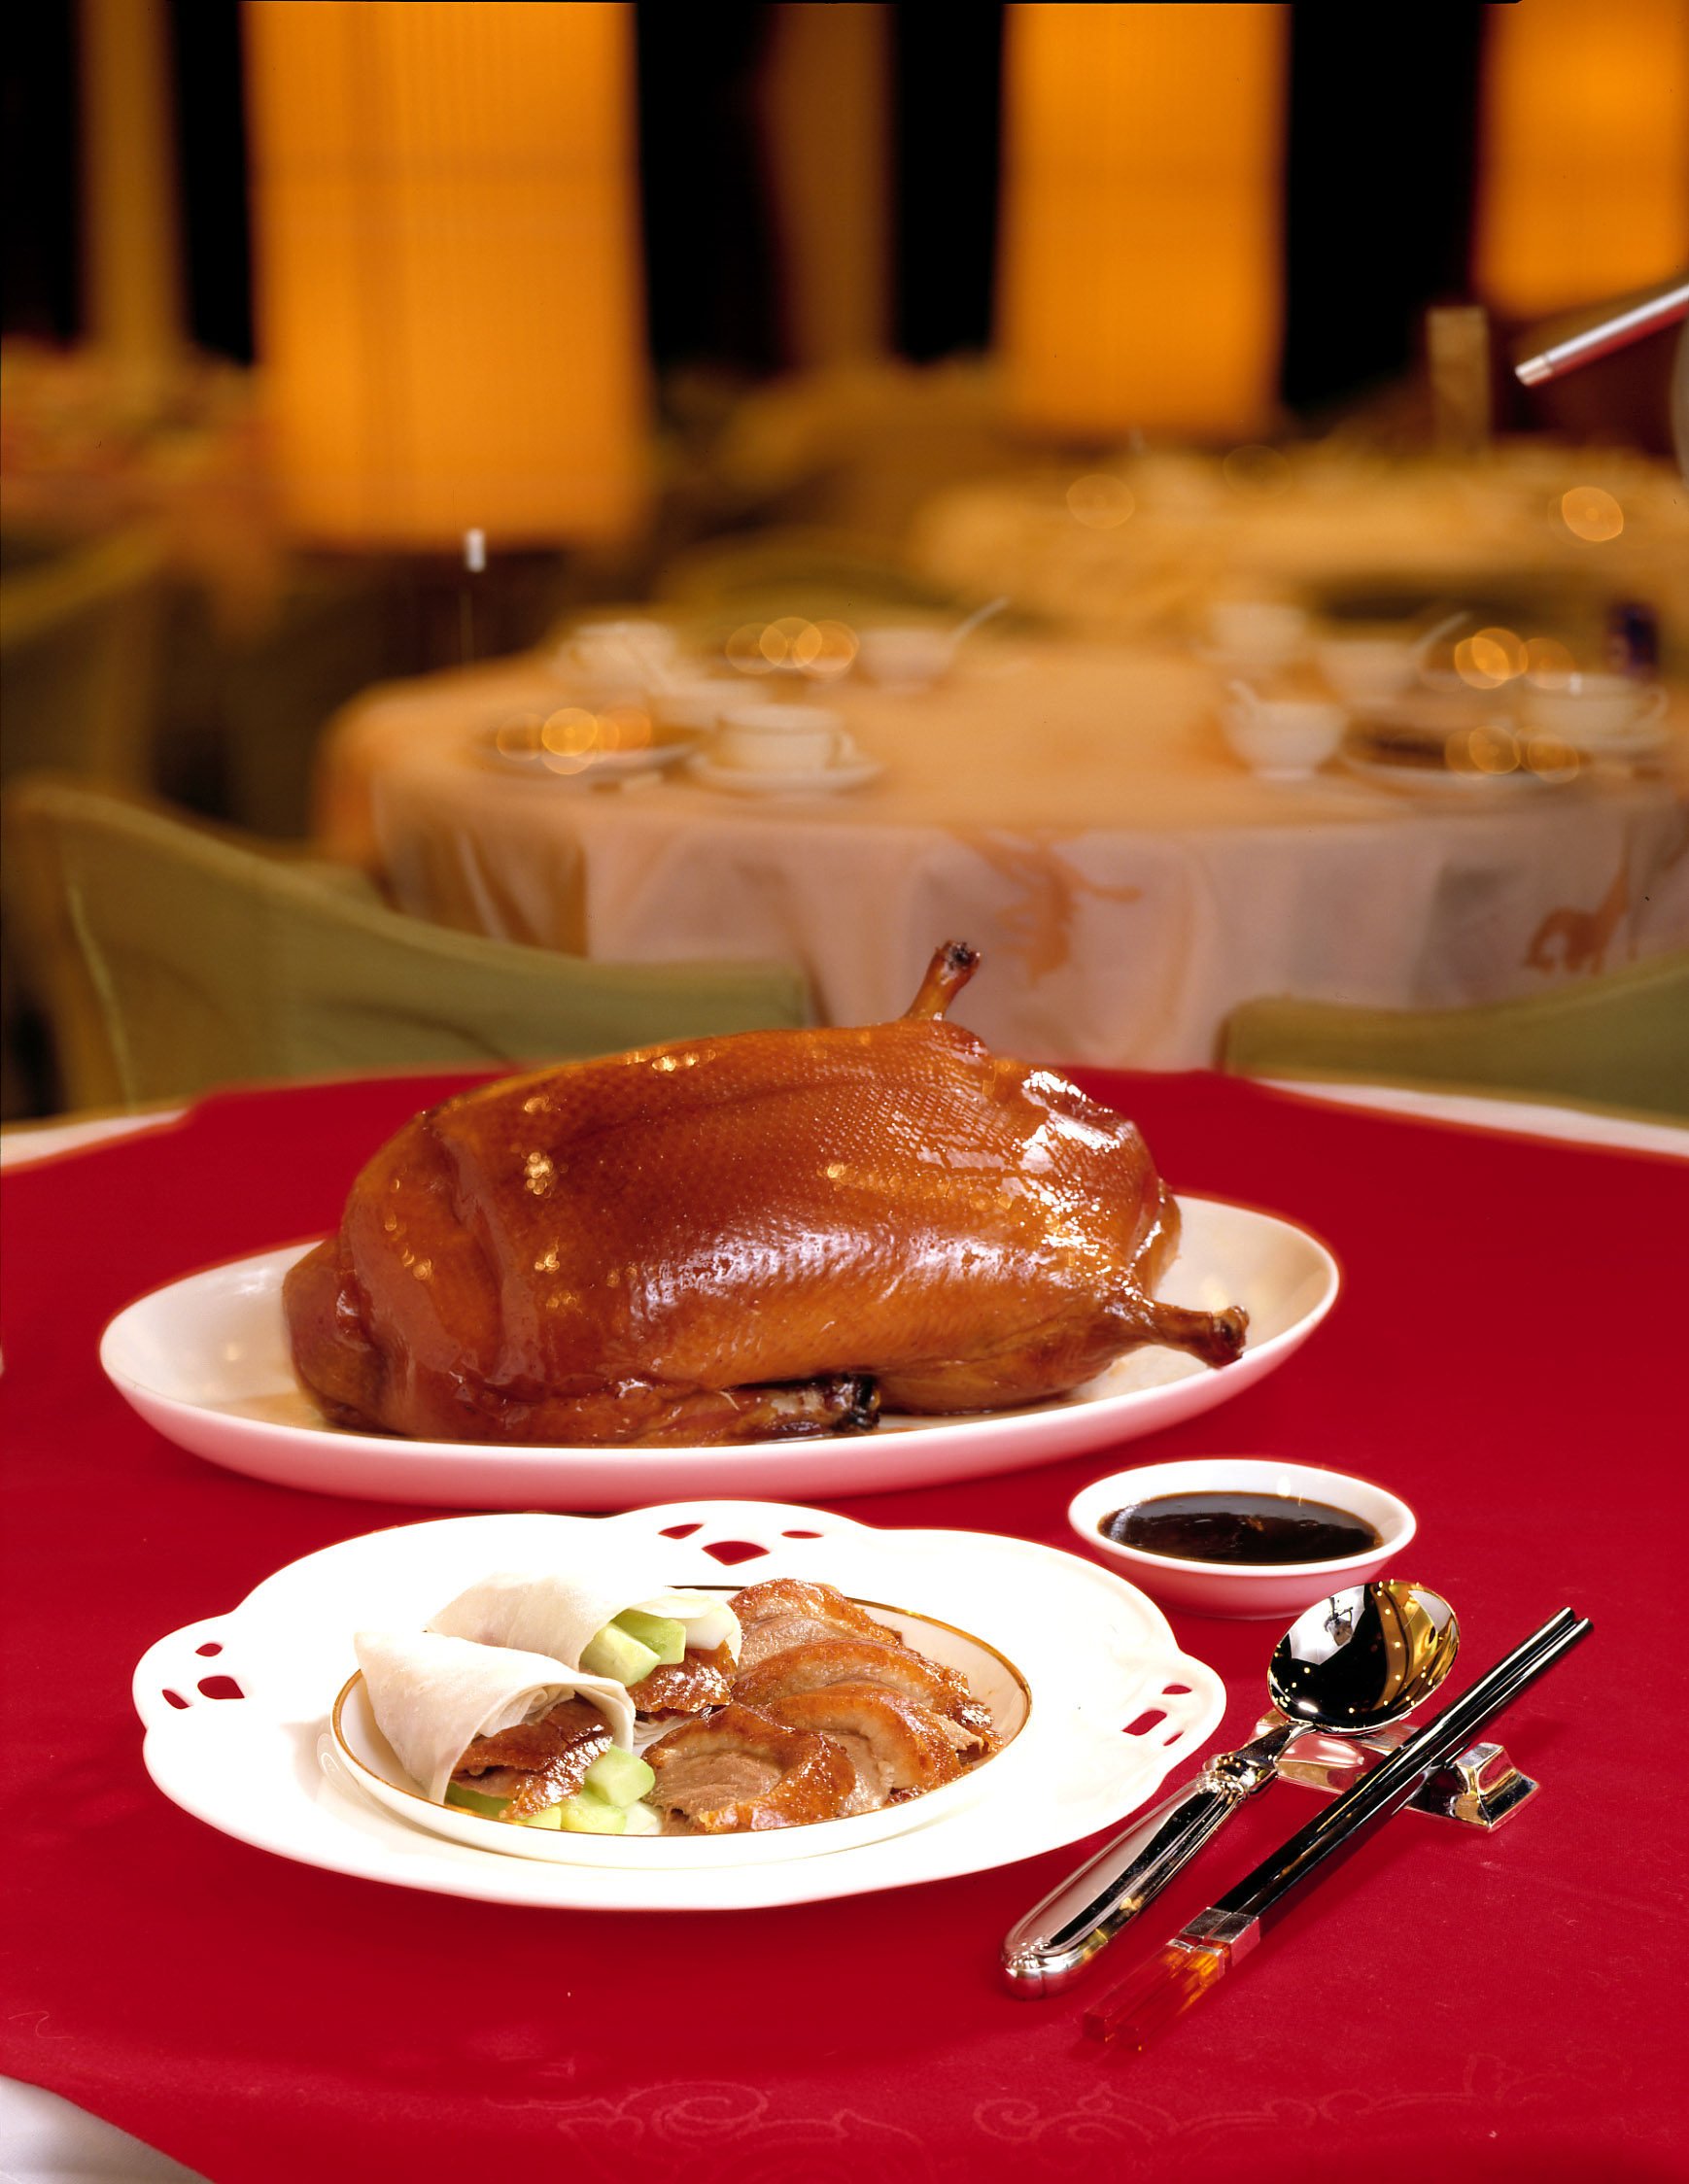 The Peking duck at Peking Garden is one of Victor Dizon’s recommendations.